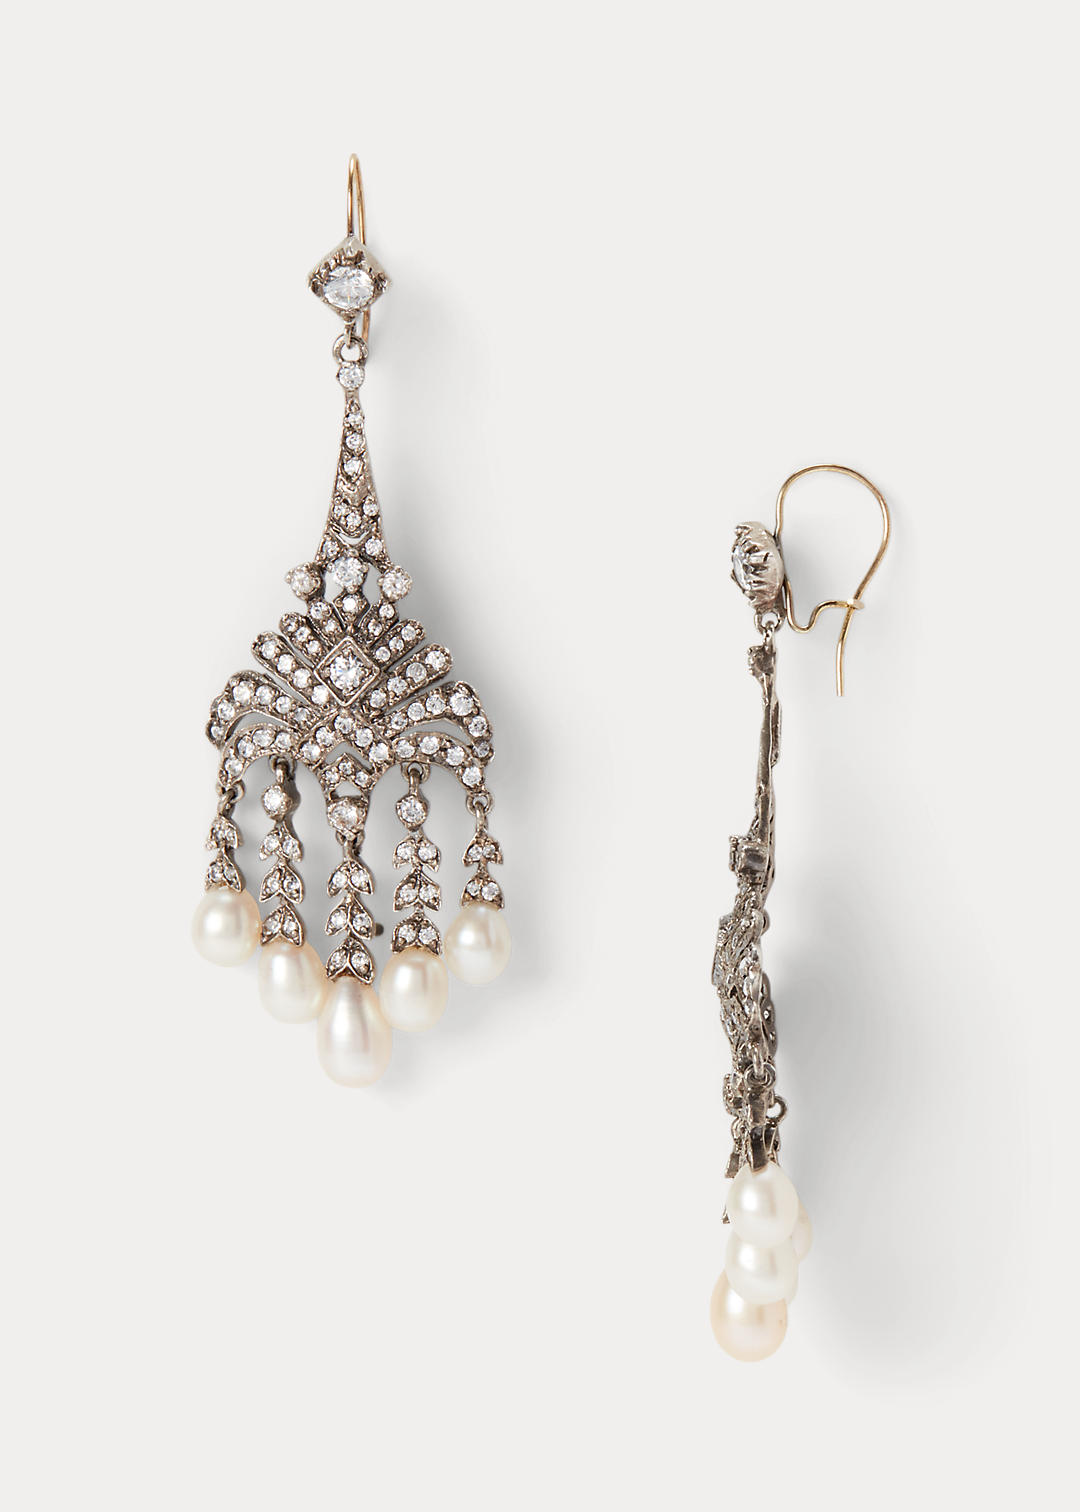 Ralph Lauren Collection Pearl and Crystal Chandelier Earrings 2